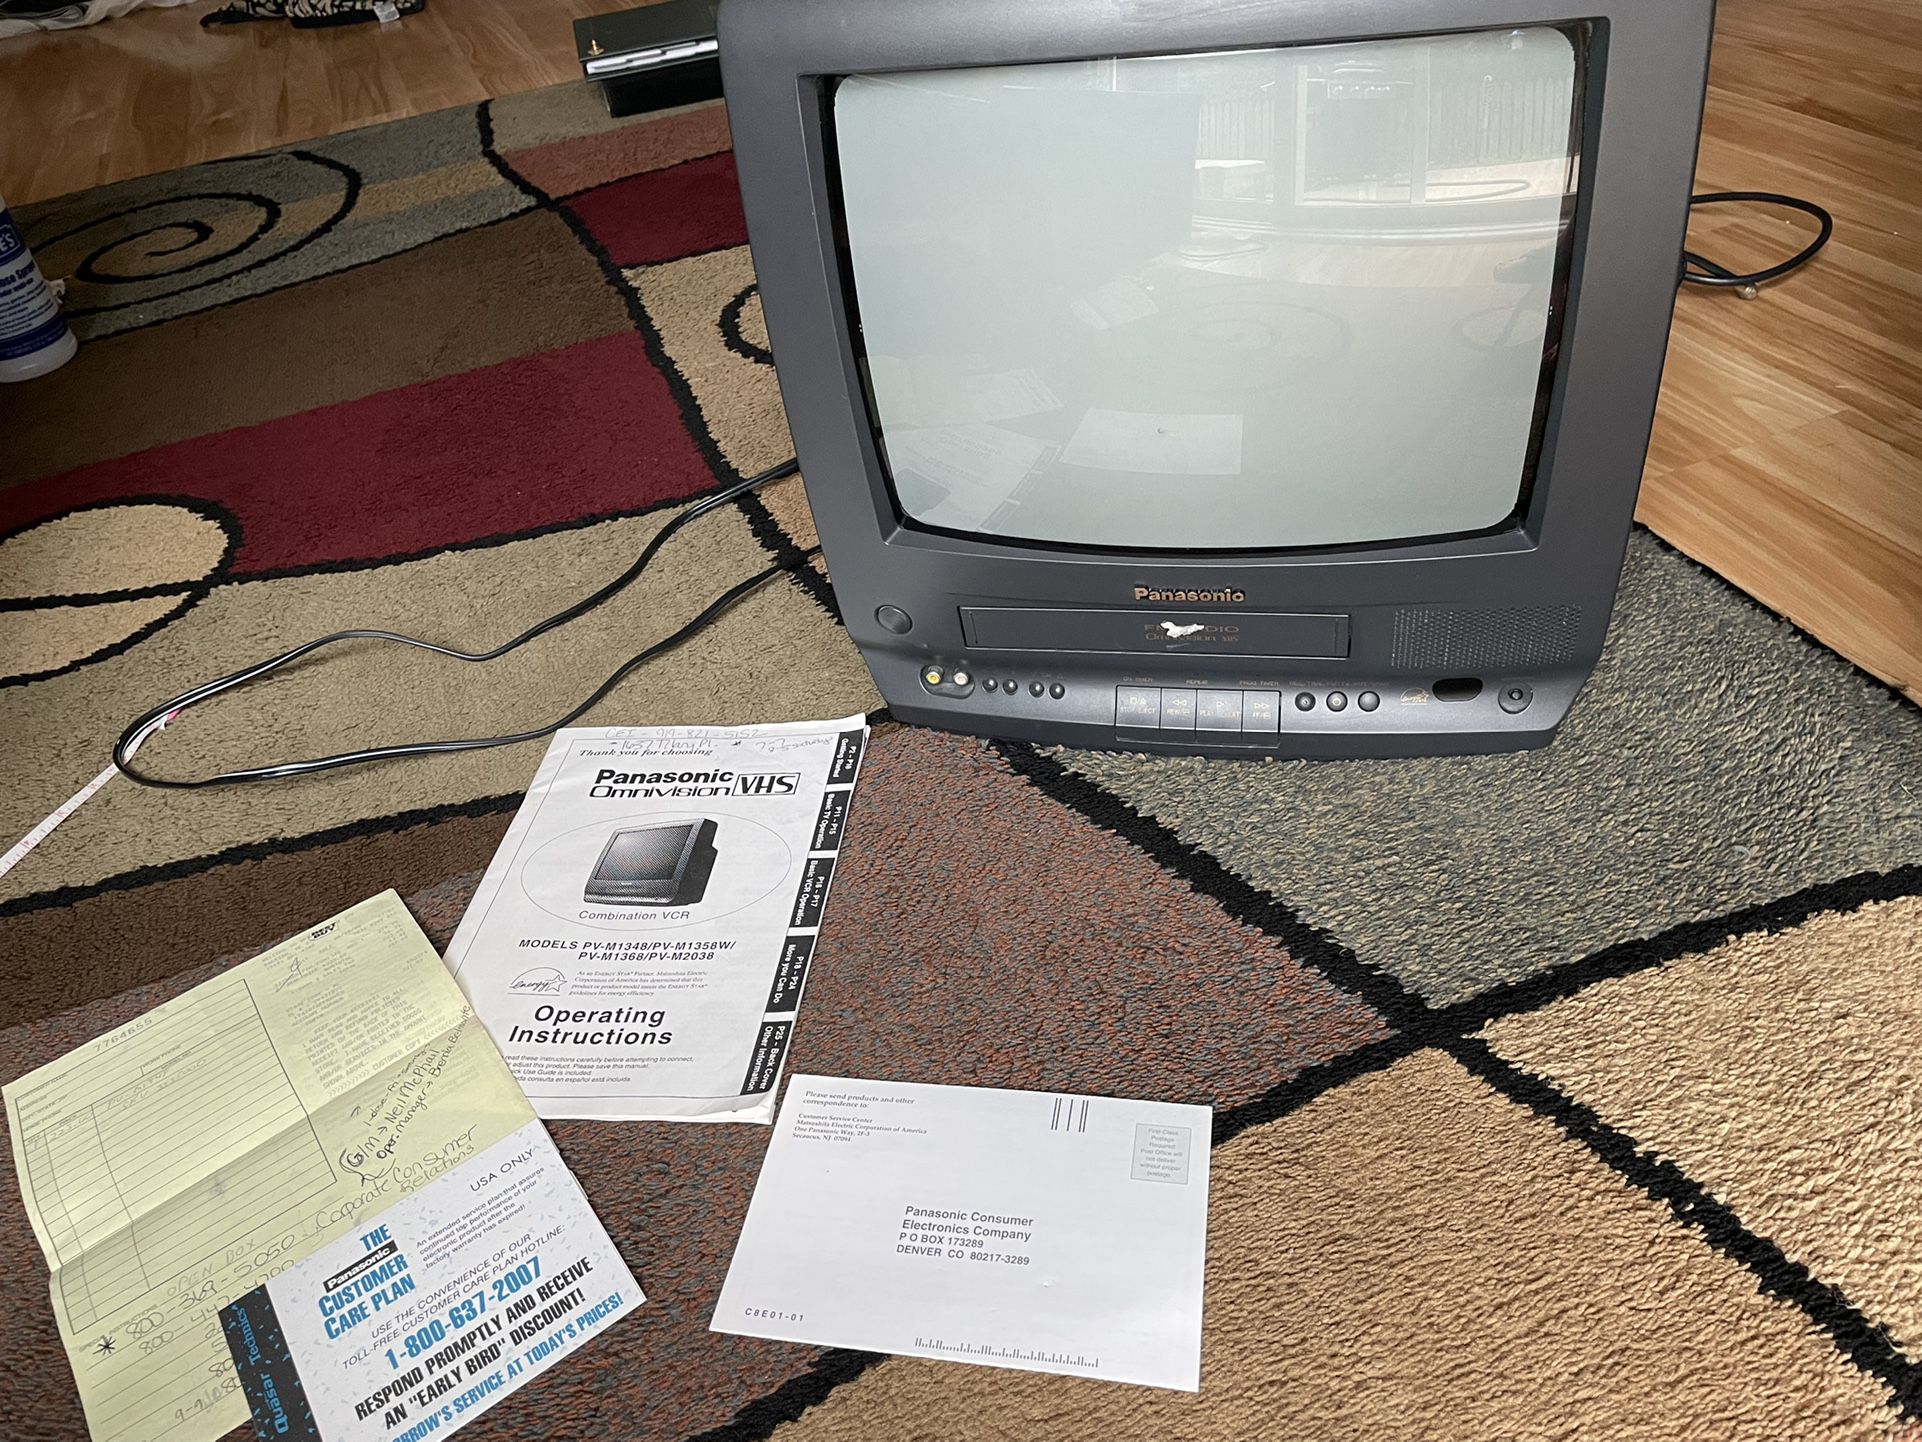 Vintage Panasonic 14” Combo TV/VCR  I am the original purchaser of this and have the book and receipt. It works great. The only issues are that my son